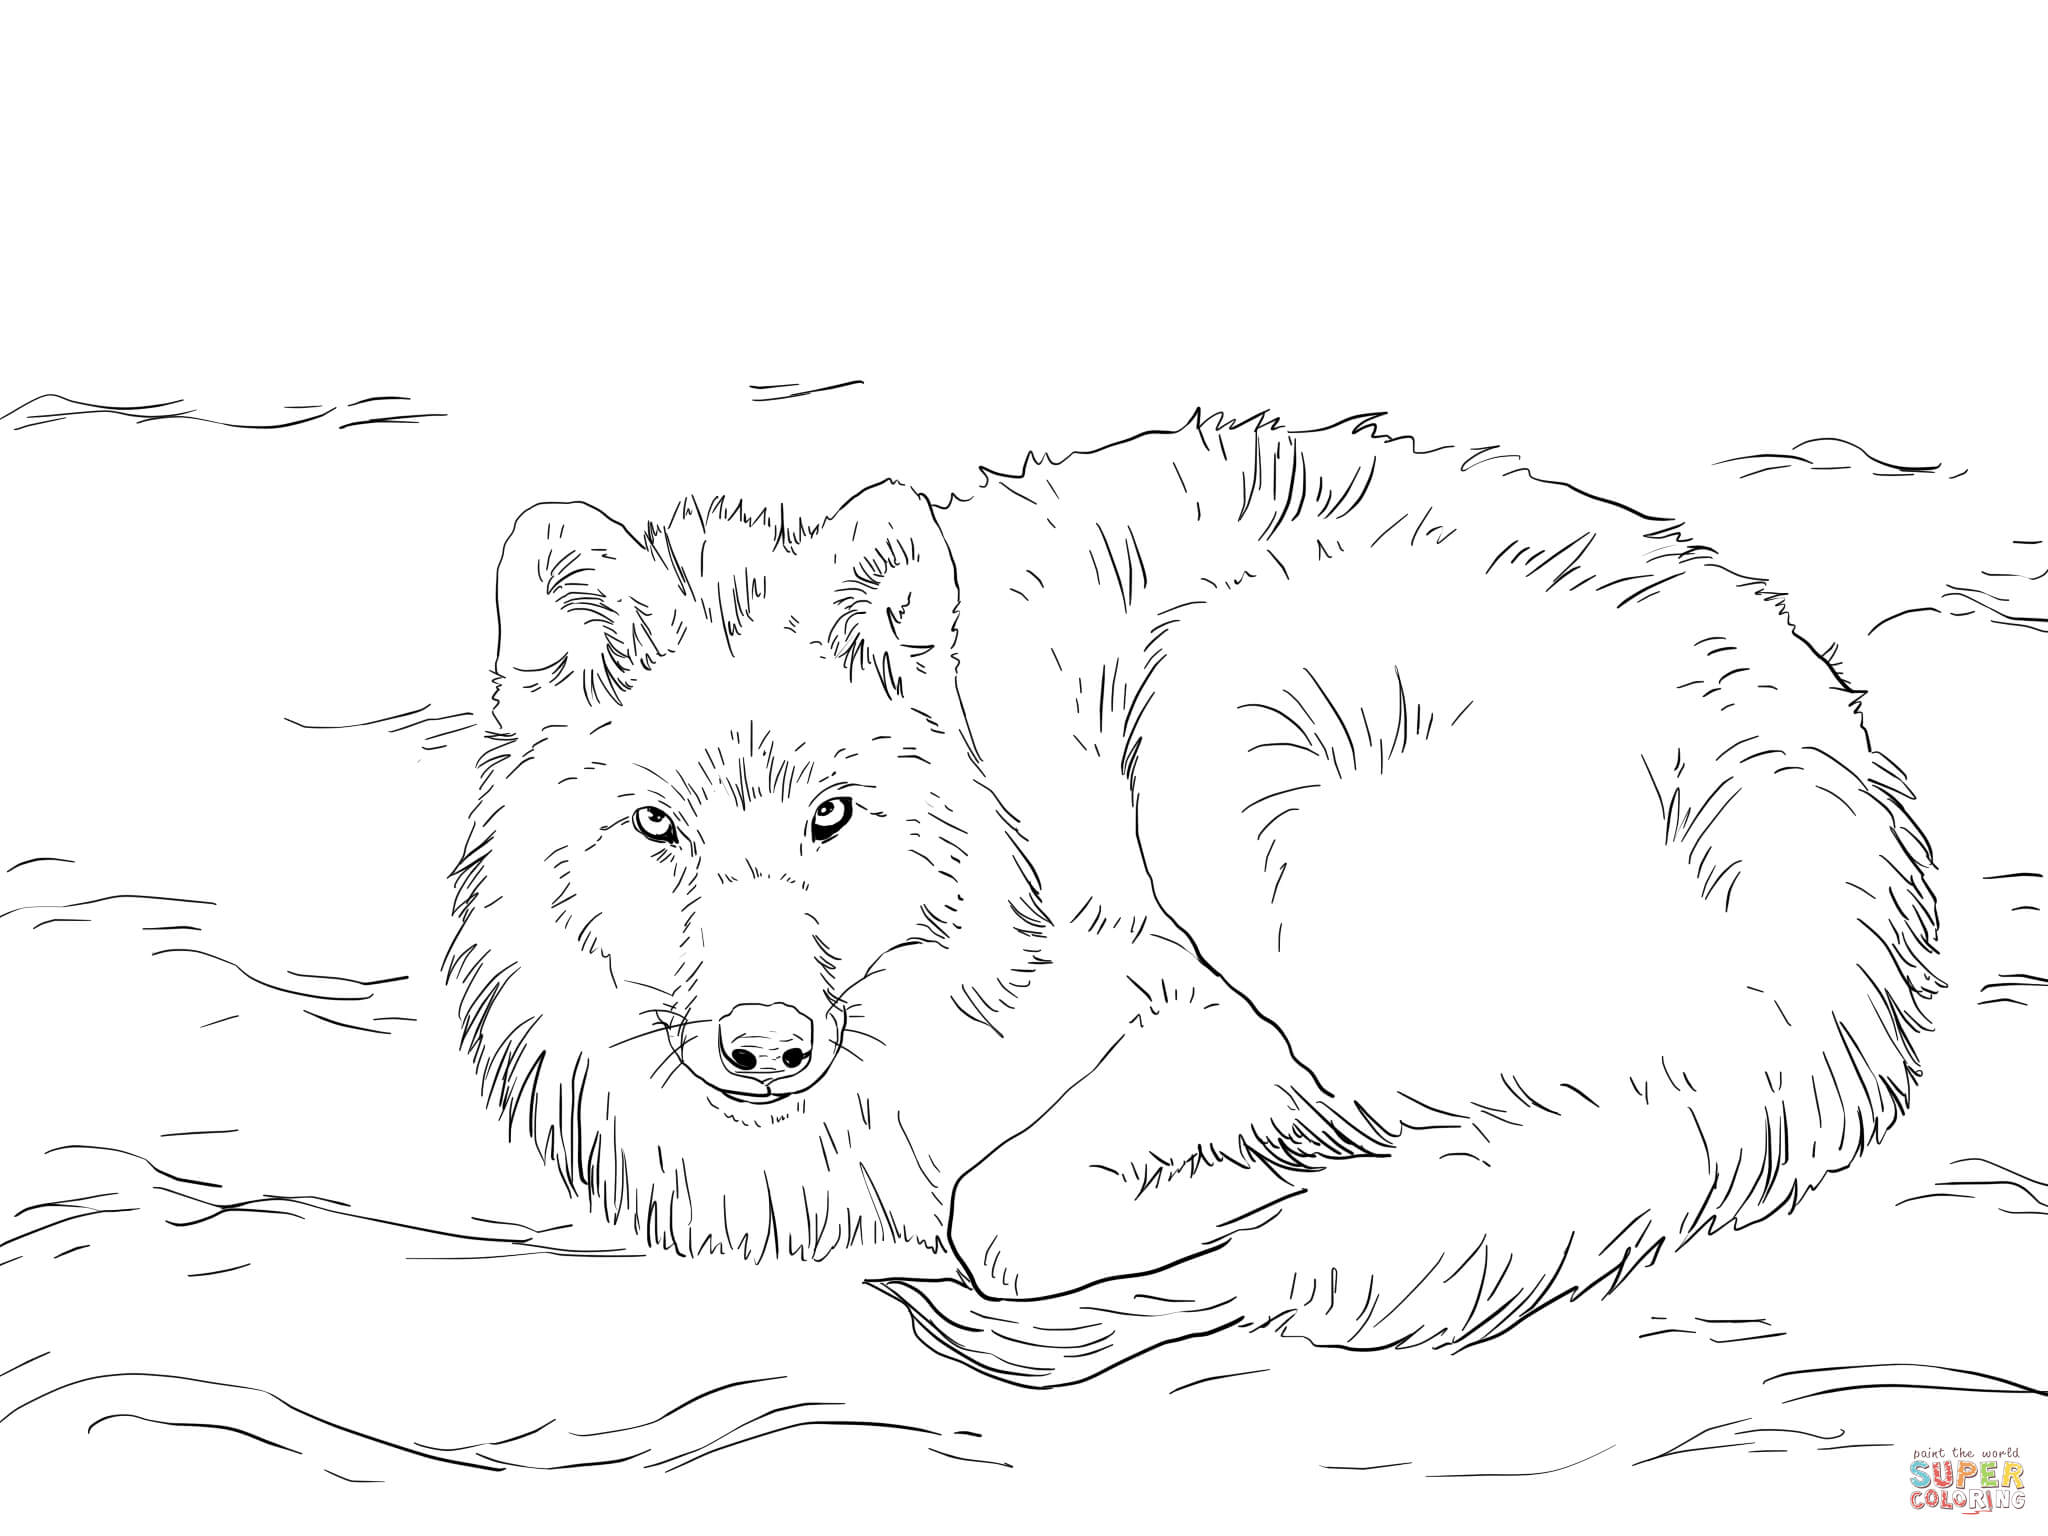 Arctic Wolf Laying on Snow coloring page | Free Printable Coloring Pages